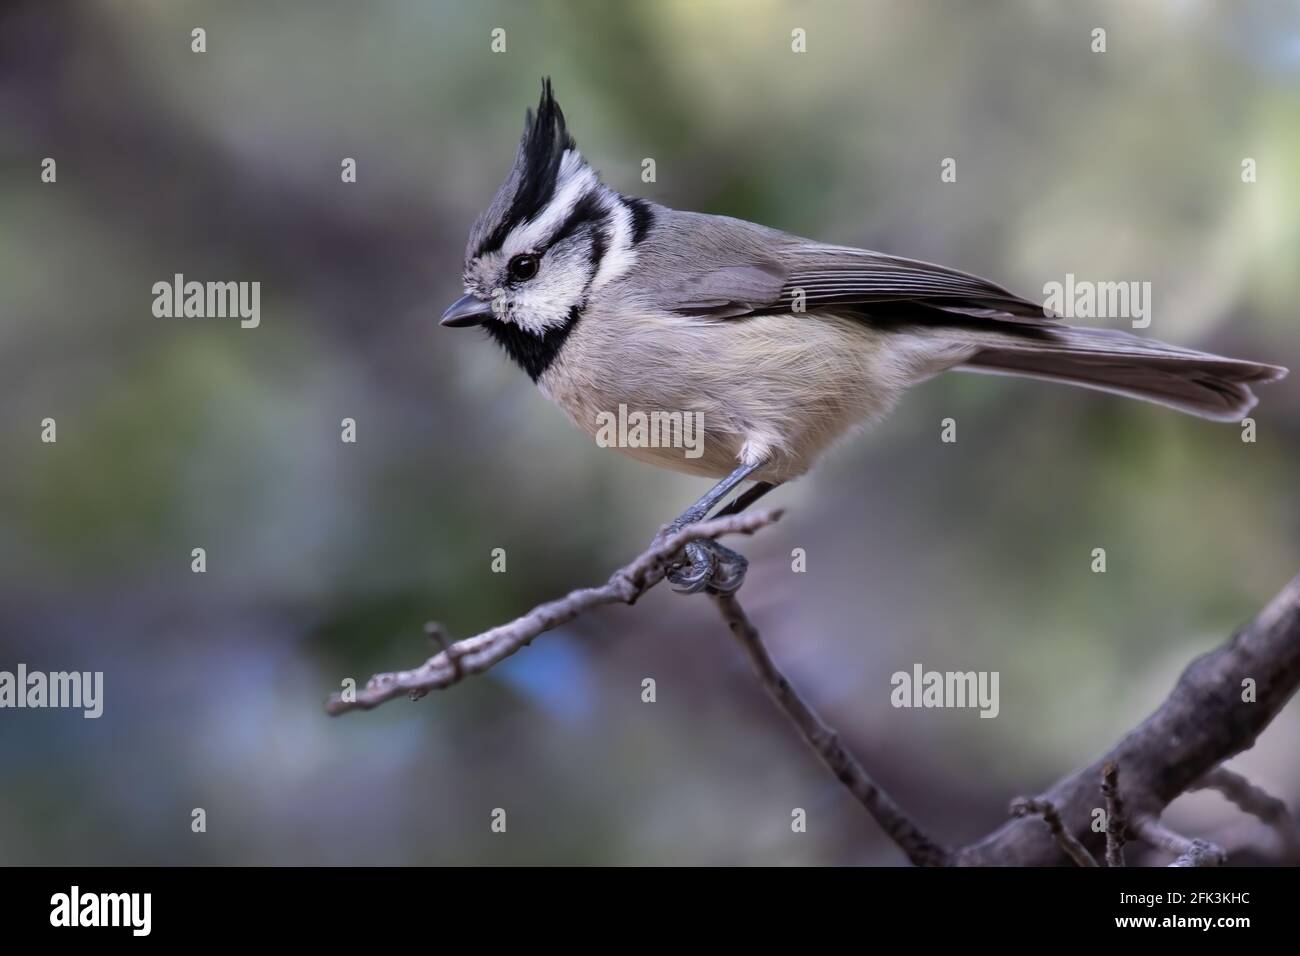 Bridled Titmouse (Baeolophus wollweberi) perched on a branch Stock Photo